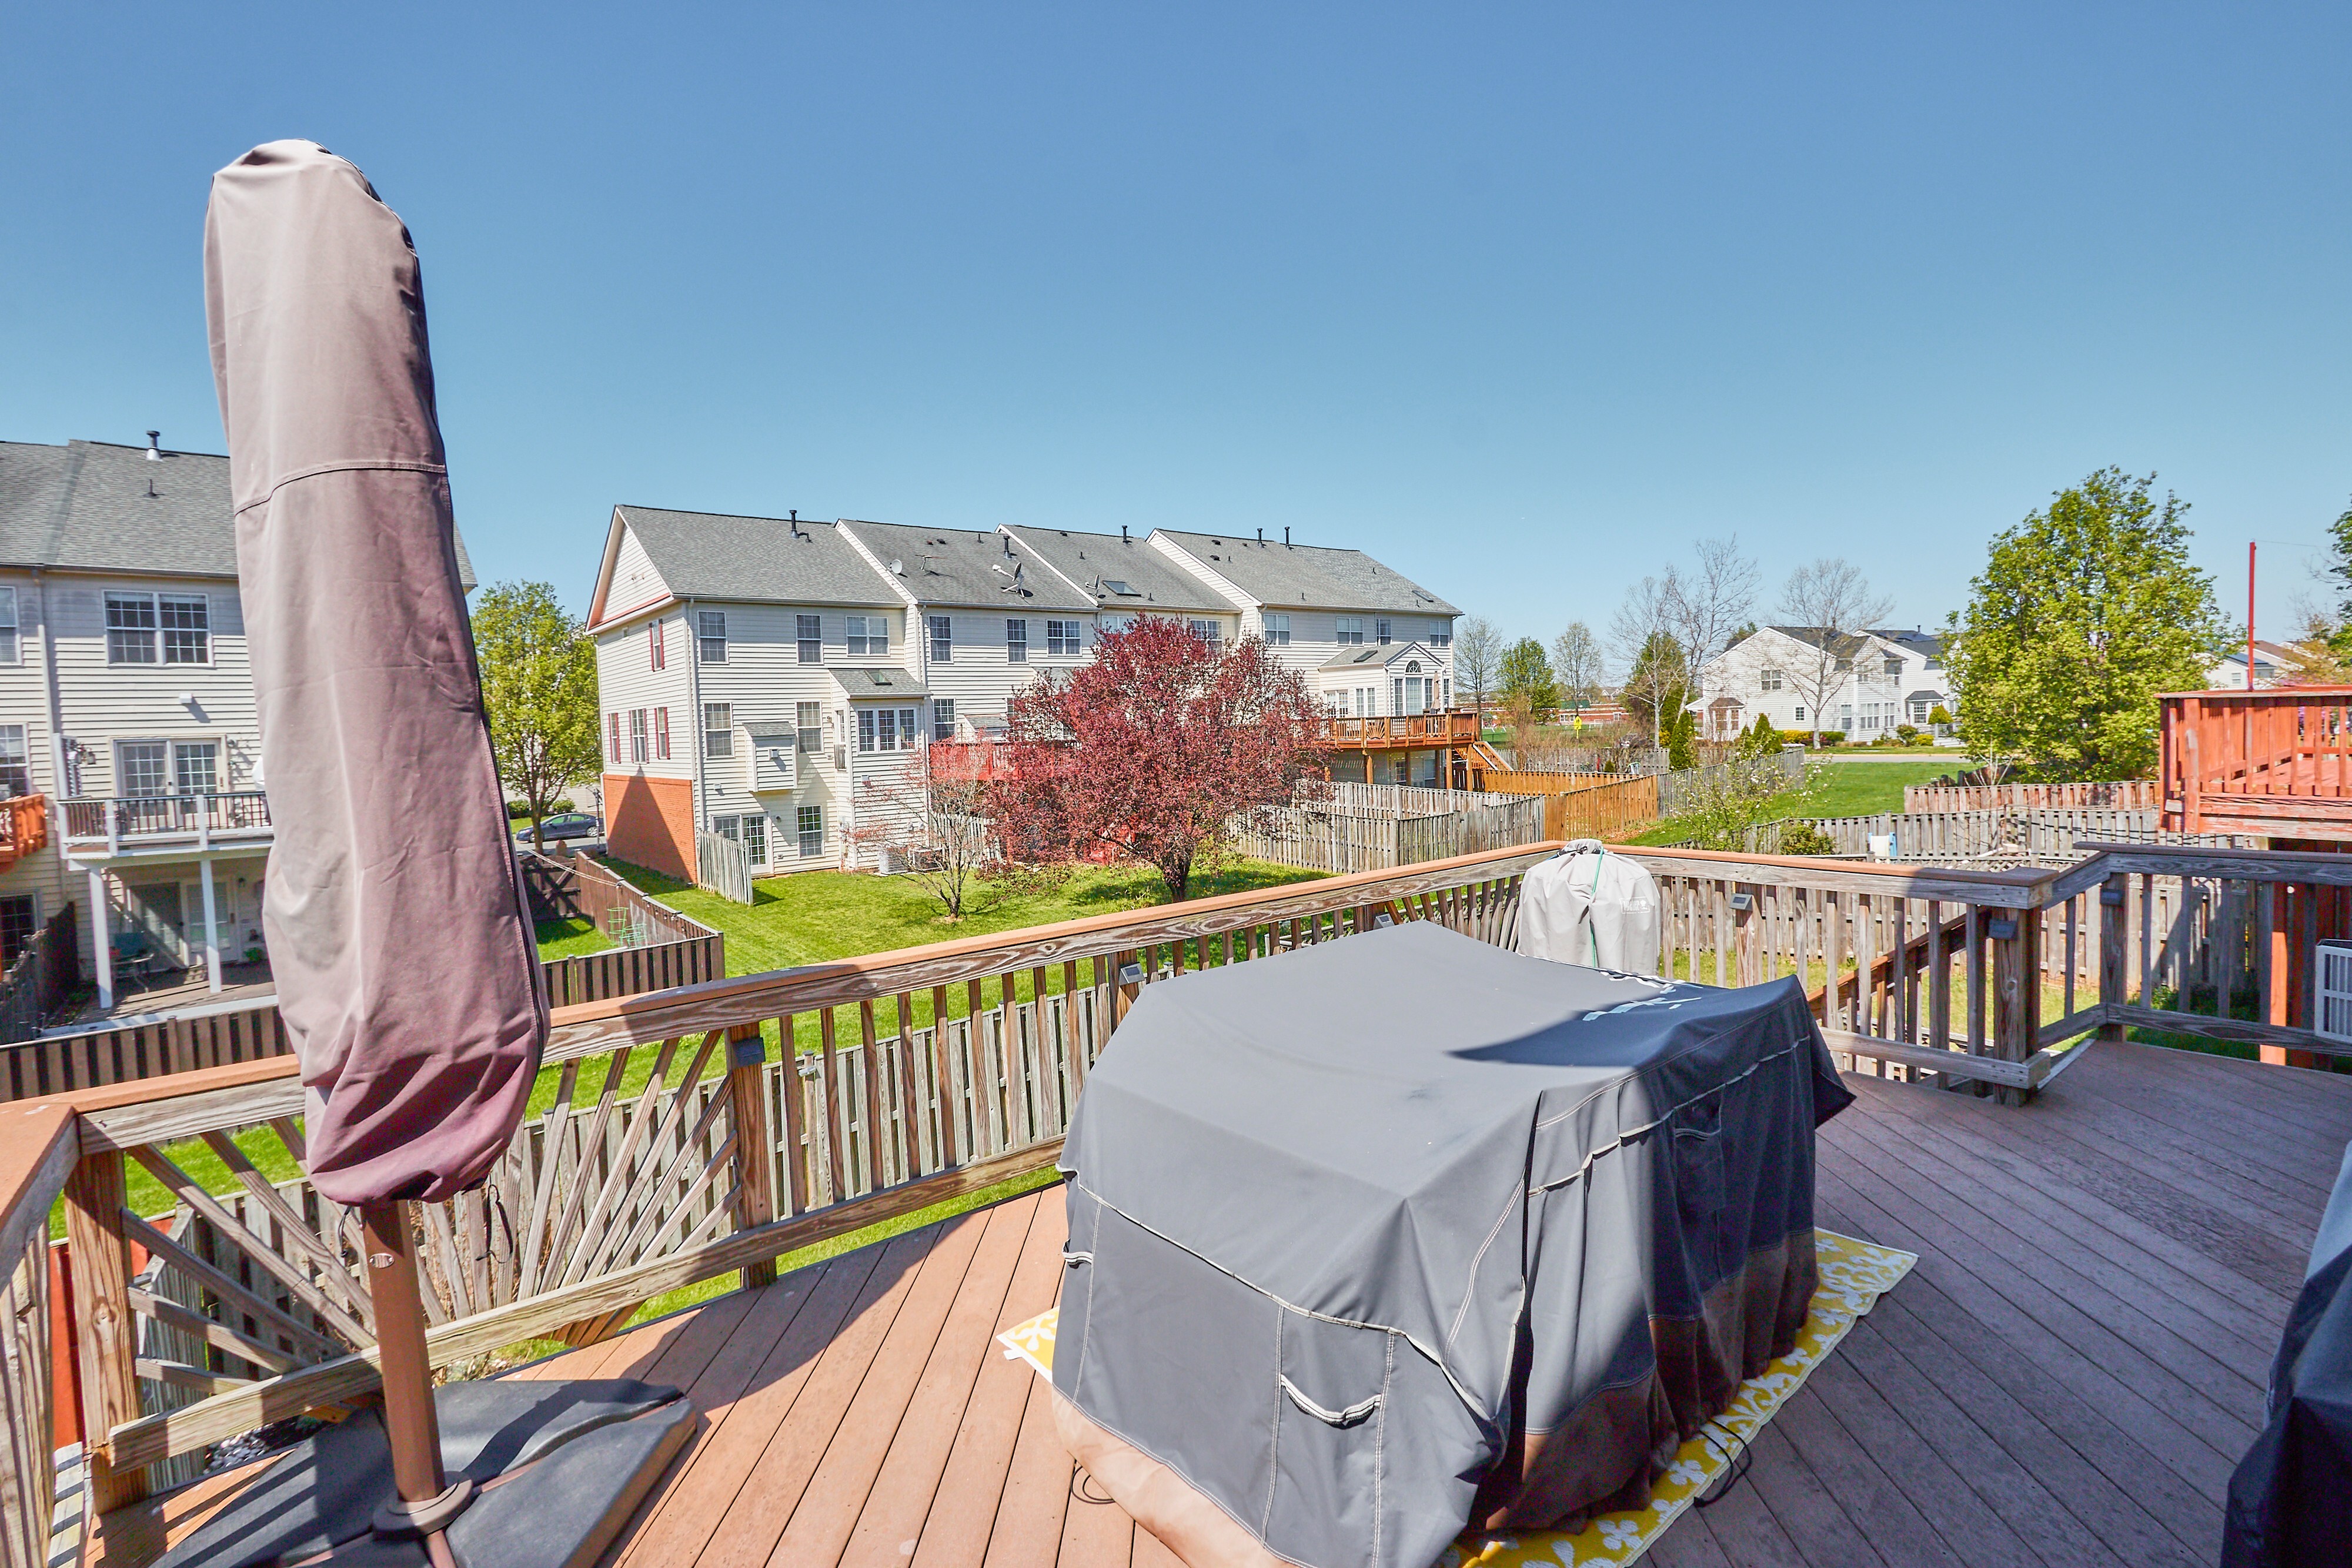 Professional exterior photo of 25499 Beresford Drive, Chantilly, Virginia - showing the deck and view behind the townhome